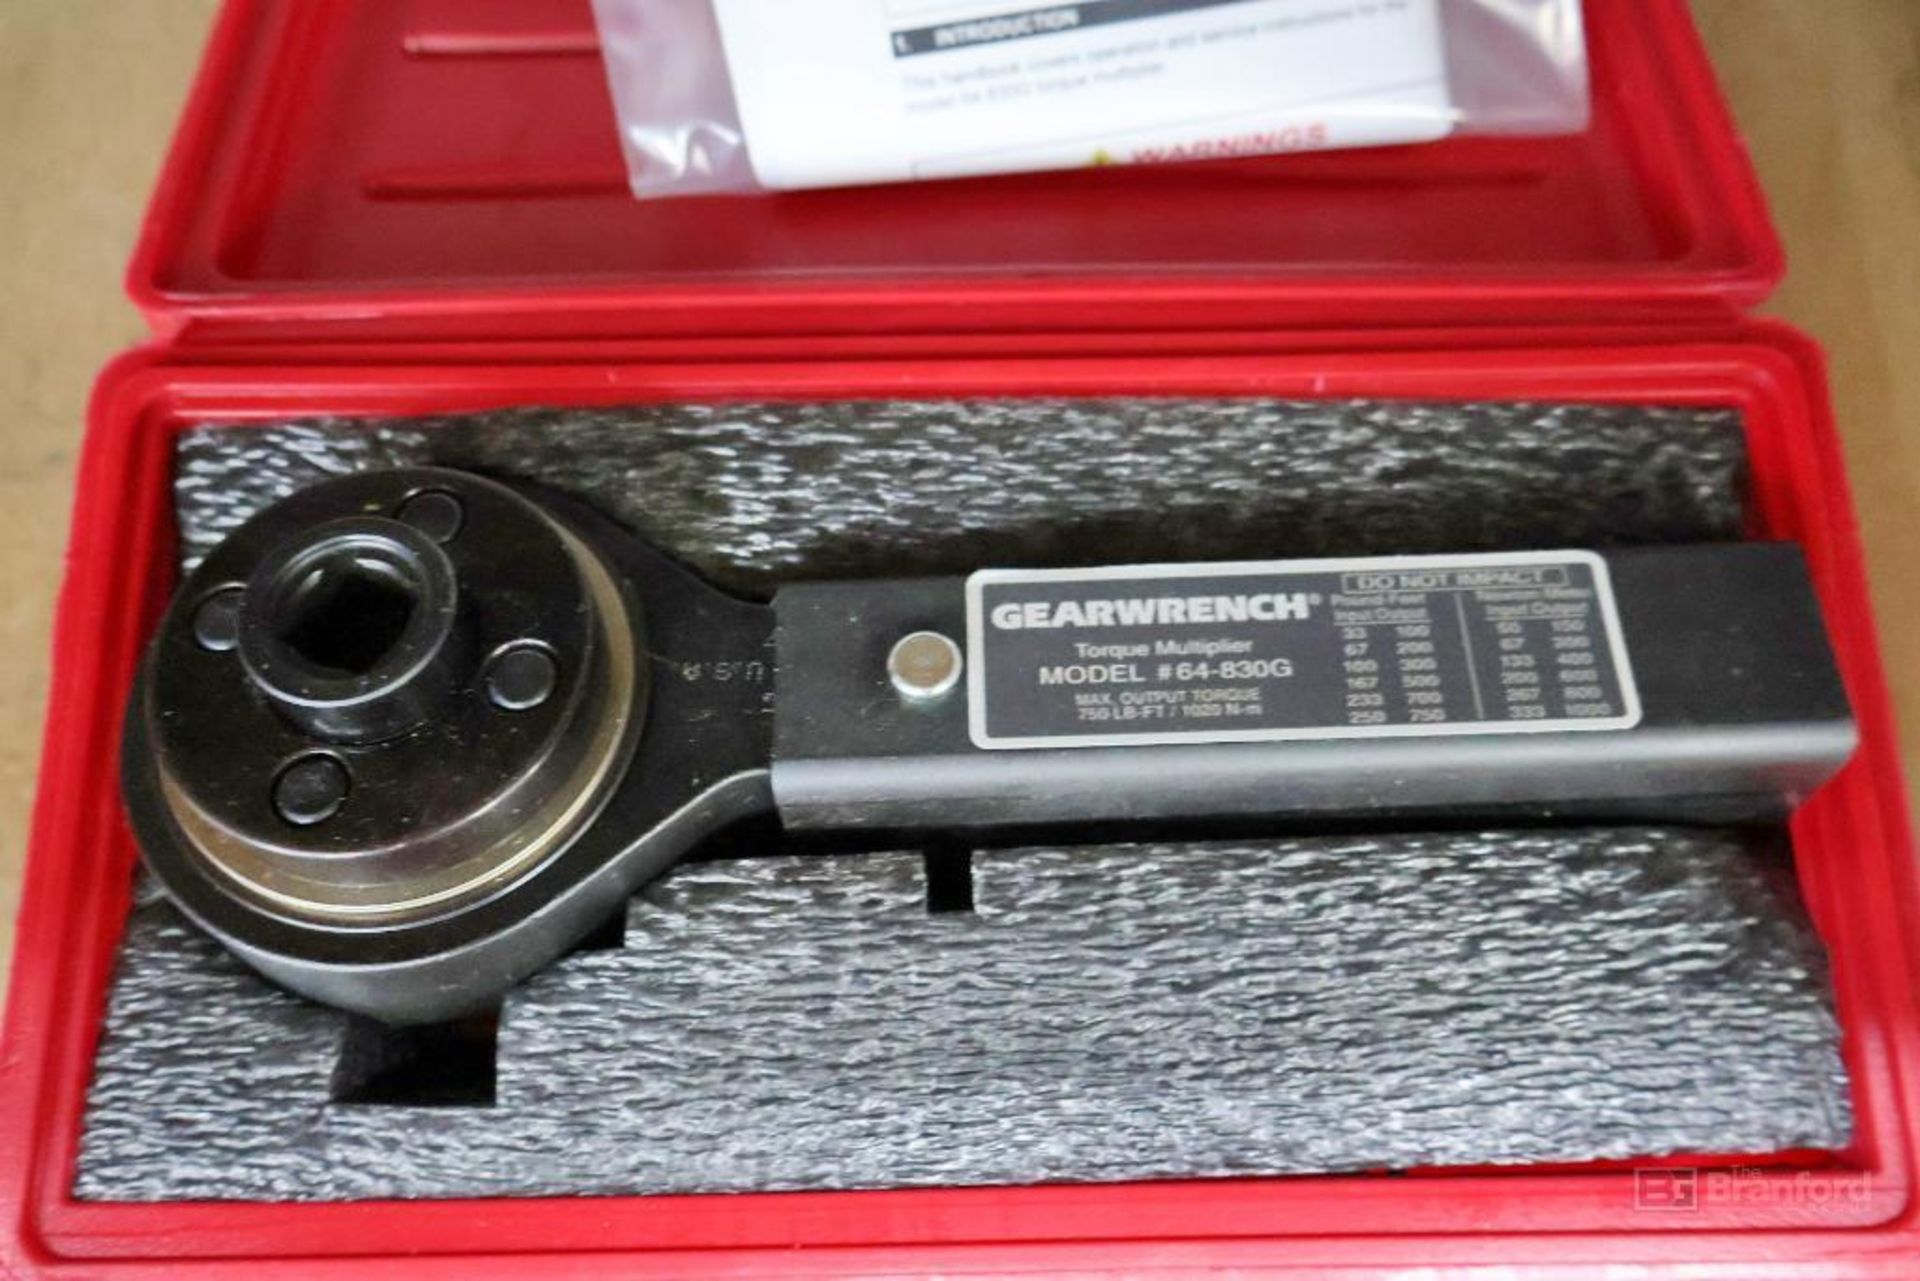 GearWrench 64-830G Torque Multiplier - Image 2 of 4